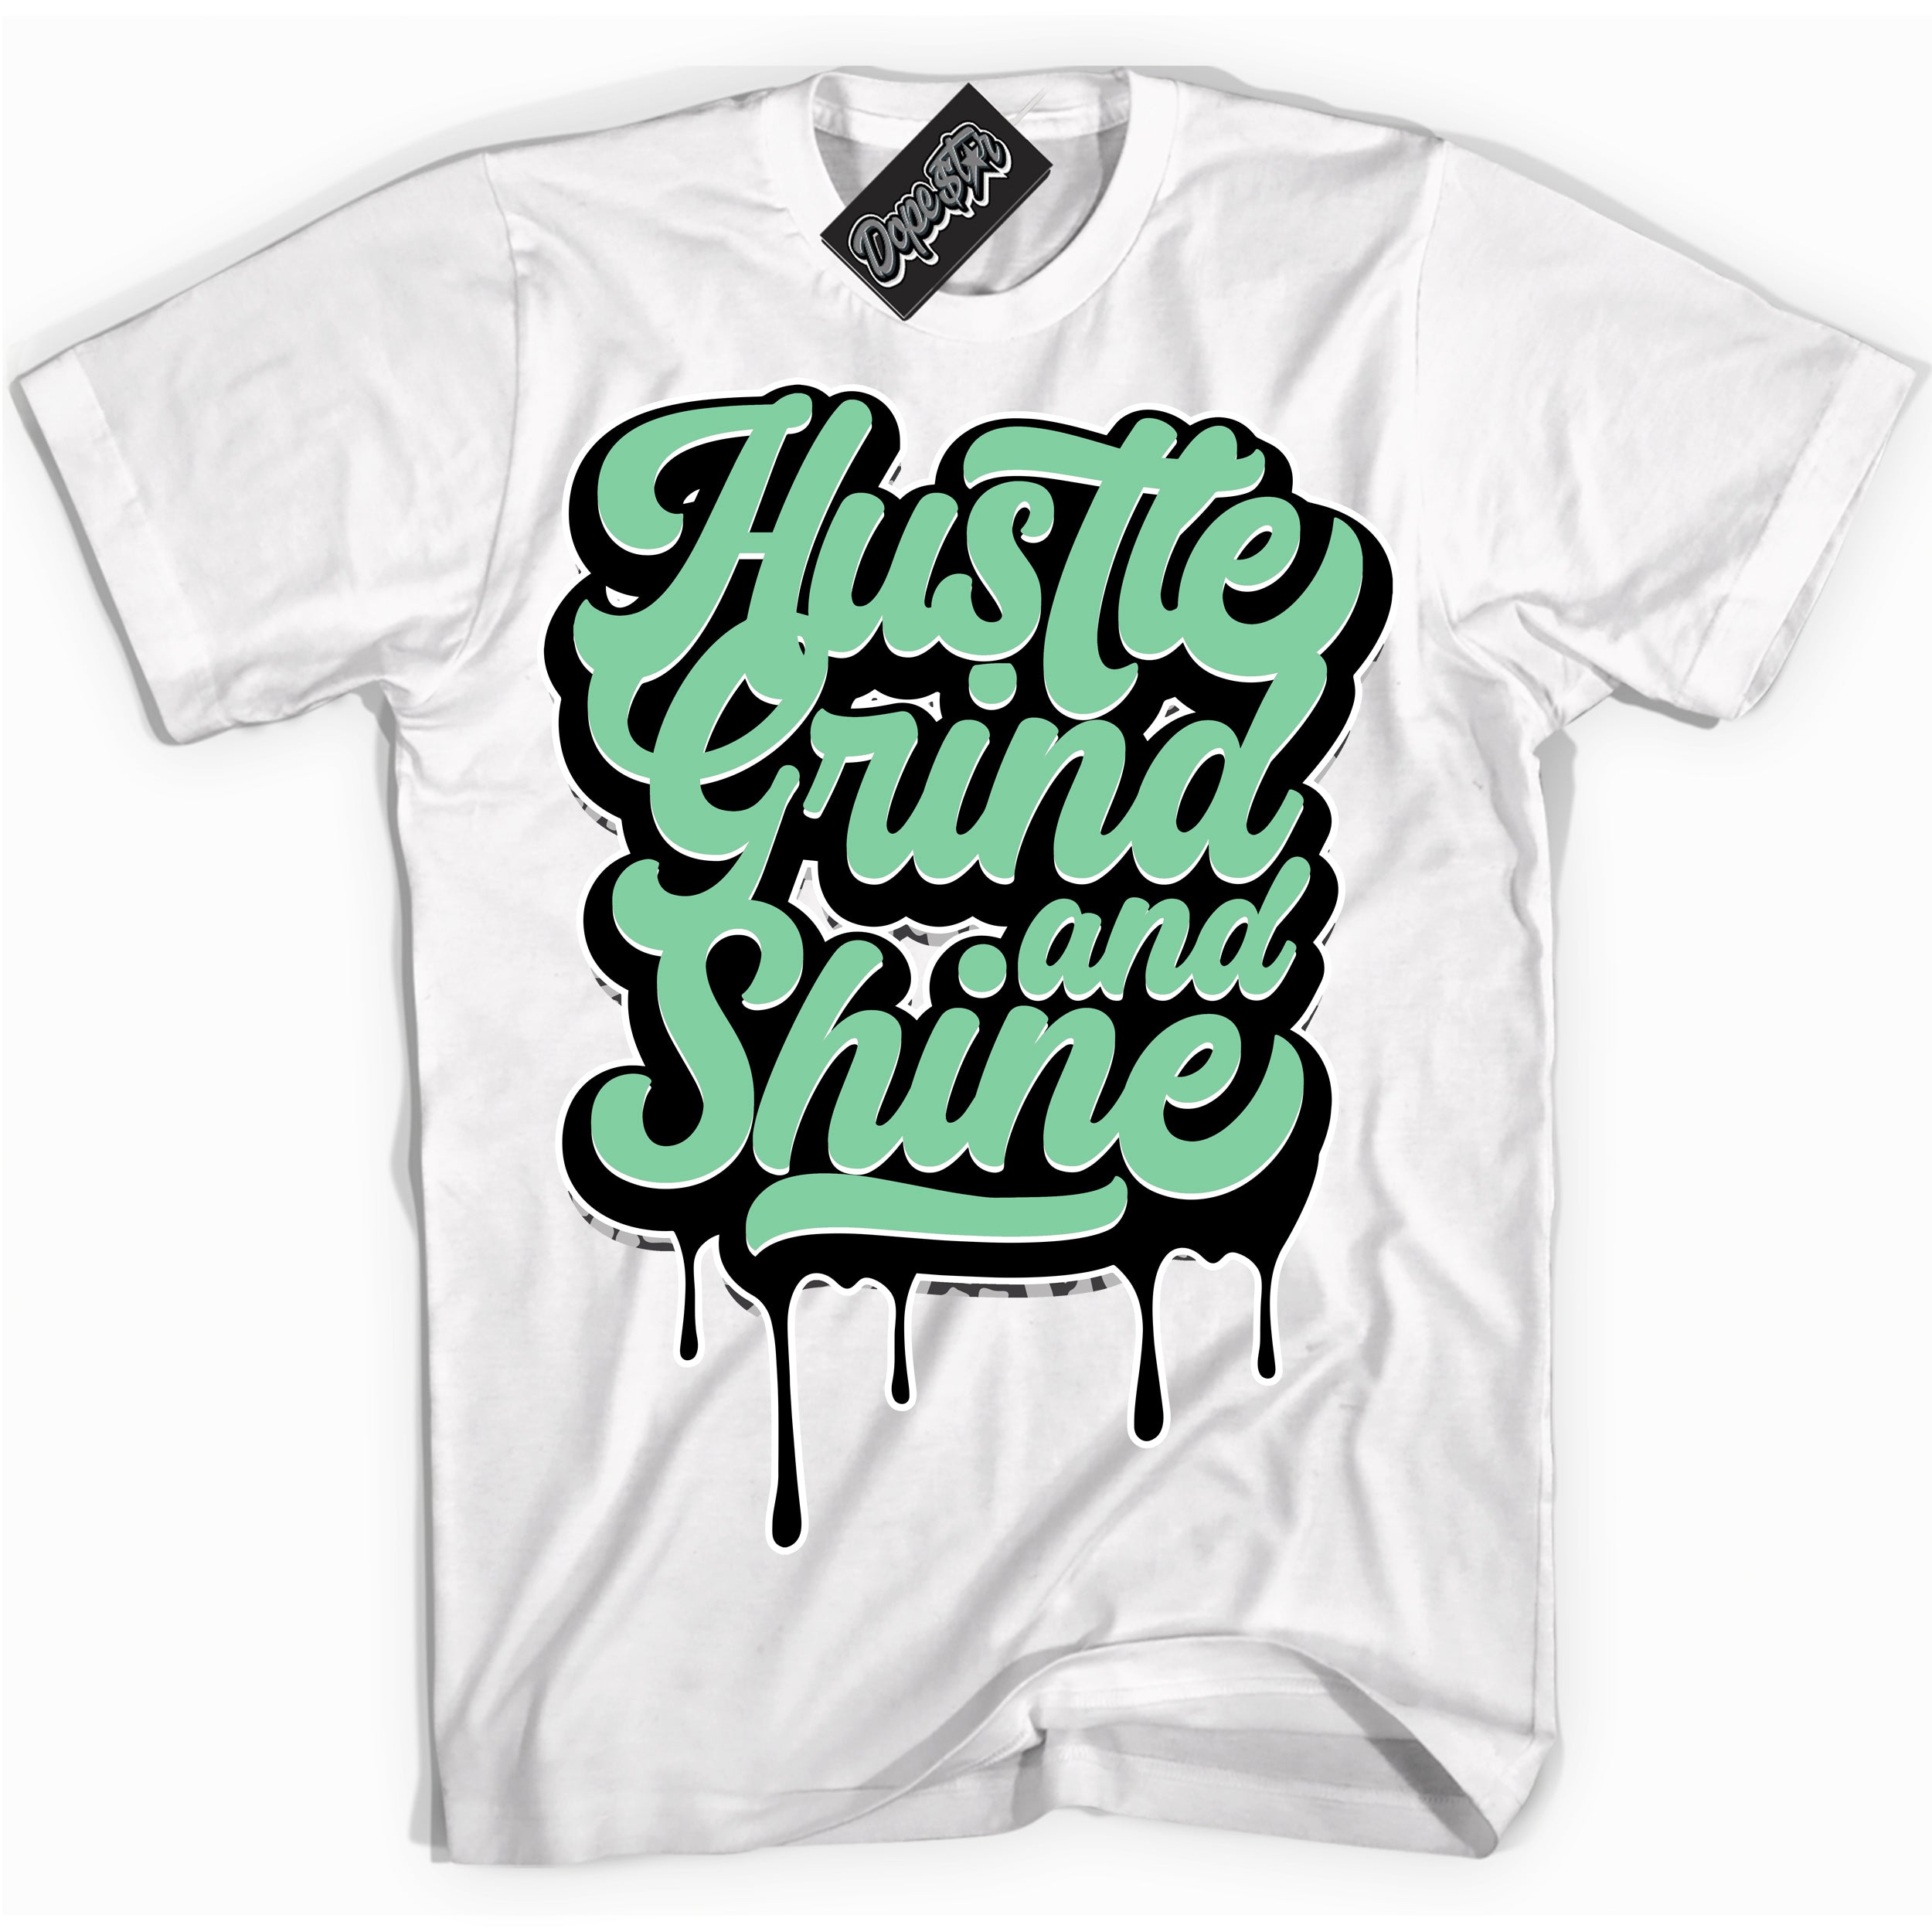 Cool White graphic tee with “ Hustle Grind And Shine ” design, that perfectly matches Green Glow 3s sneakers 